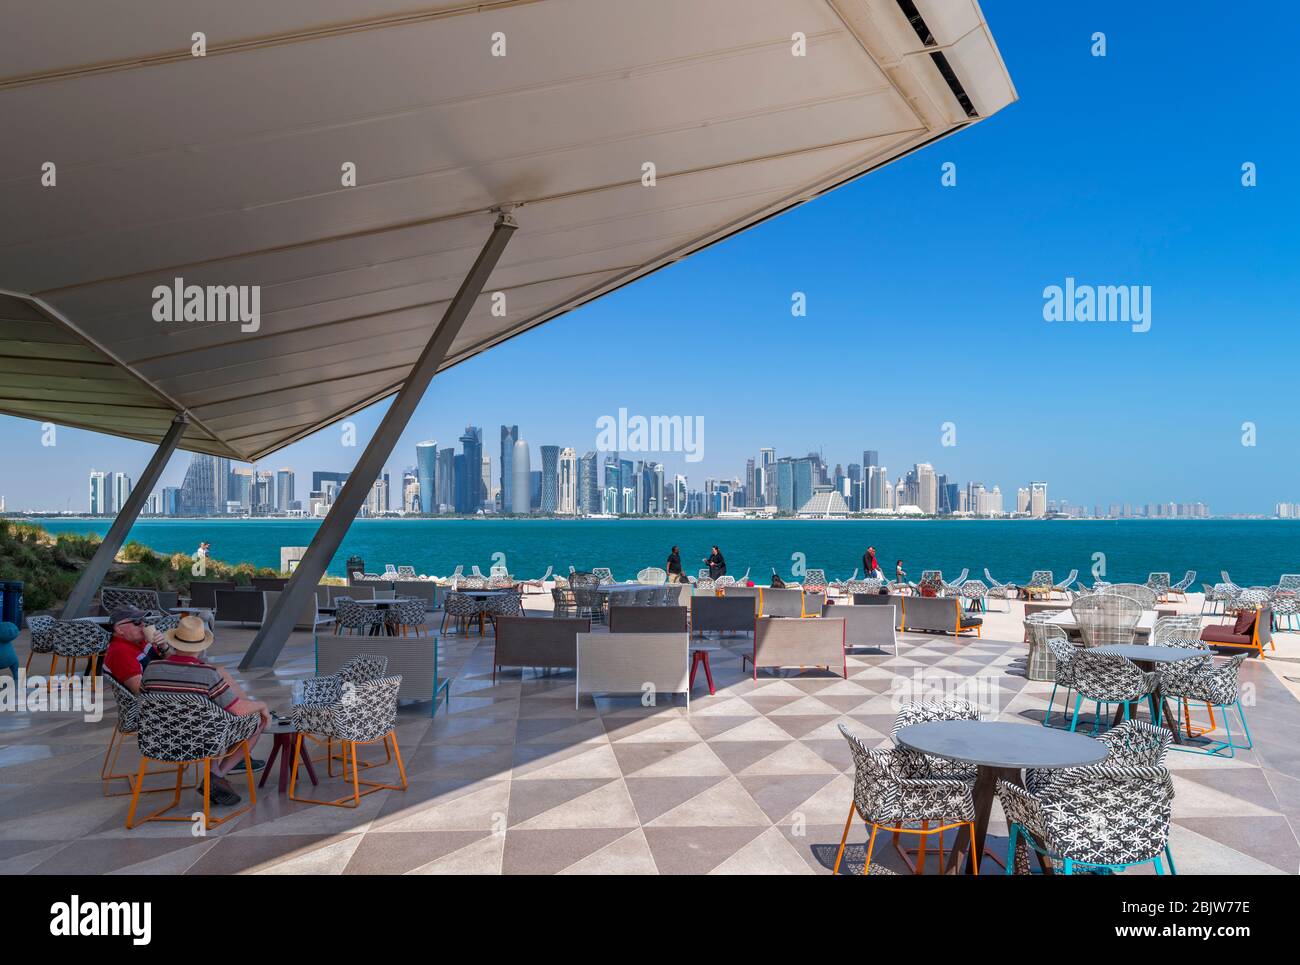 Doha. The MIA Park Cafe in MIA Park with the skyline of the West Bay Central Business District behind, Doha, Qatar, Middle East Stock Photo